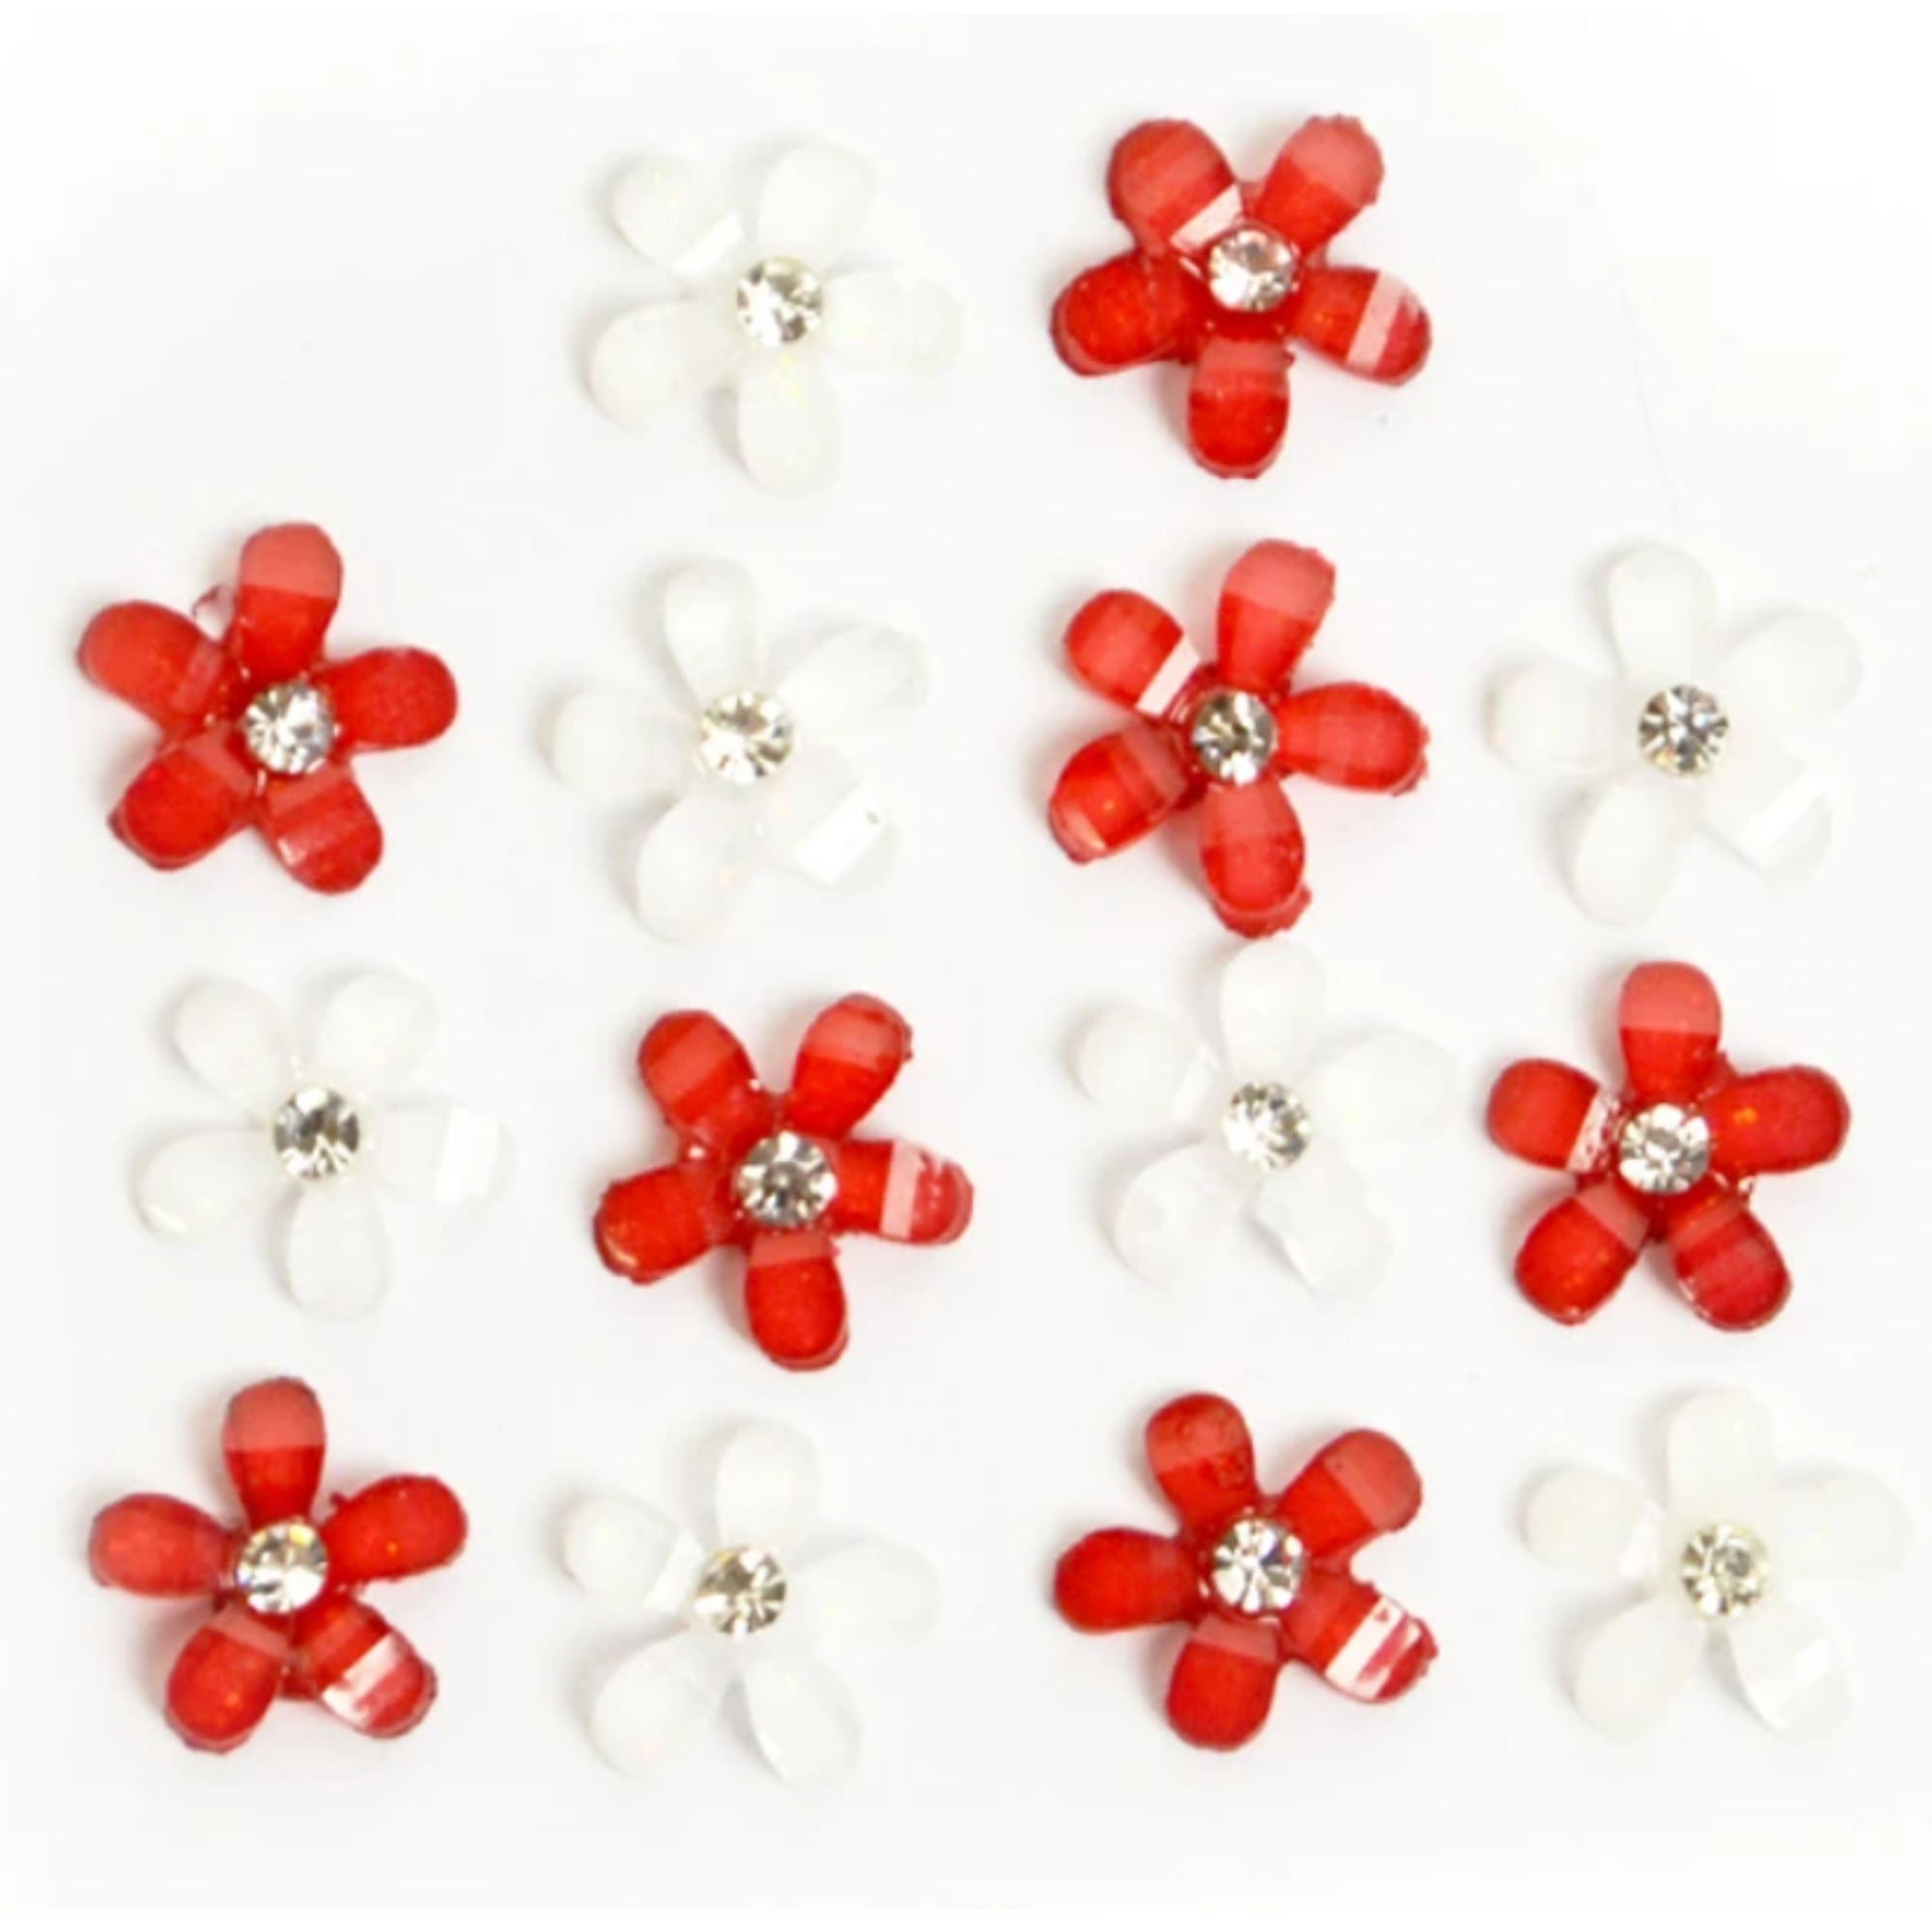 Dress it Up Collection Flowers For You 10mm Flatback Rhinestone Scrapbook Embellishments by Jesse James Buttons